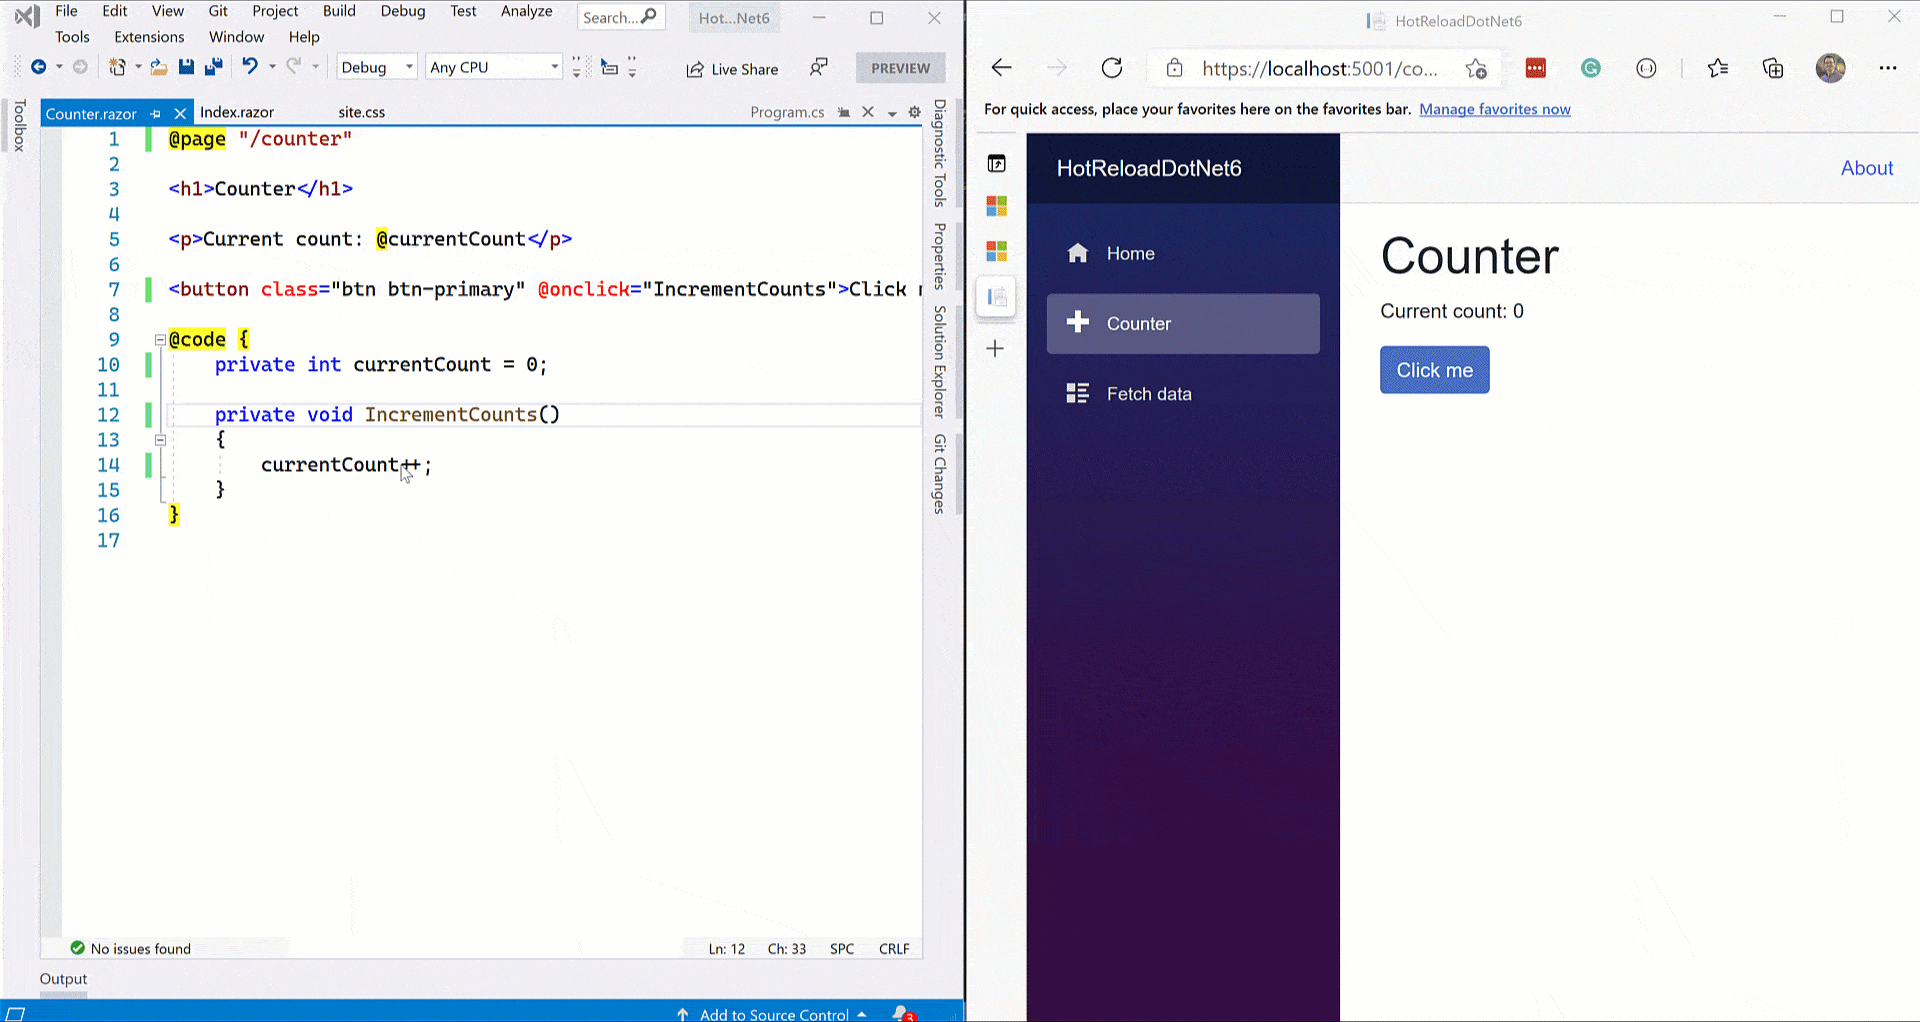 Update C# code to see the instant feedback. This time, in the editor window, a button's code gets updated to add 5 rather than nothing. When the localhost window is refreshed, the button works with the new code.